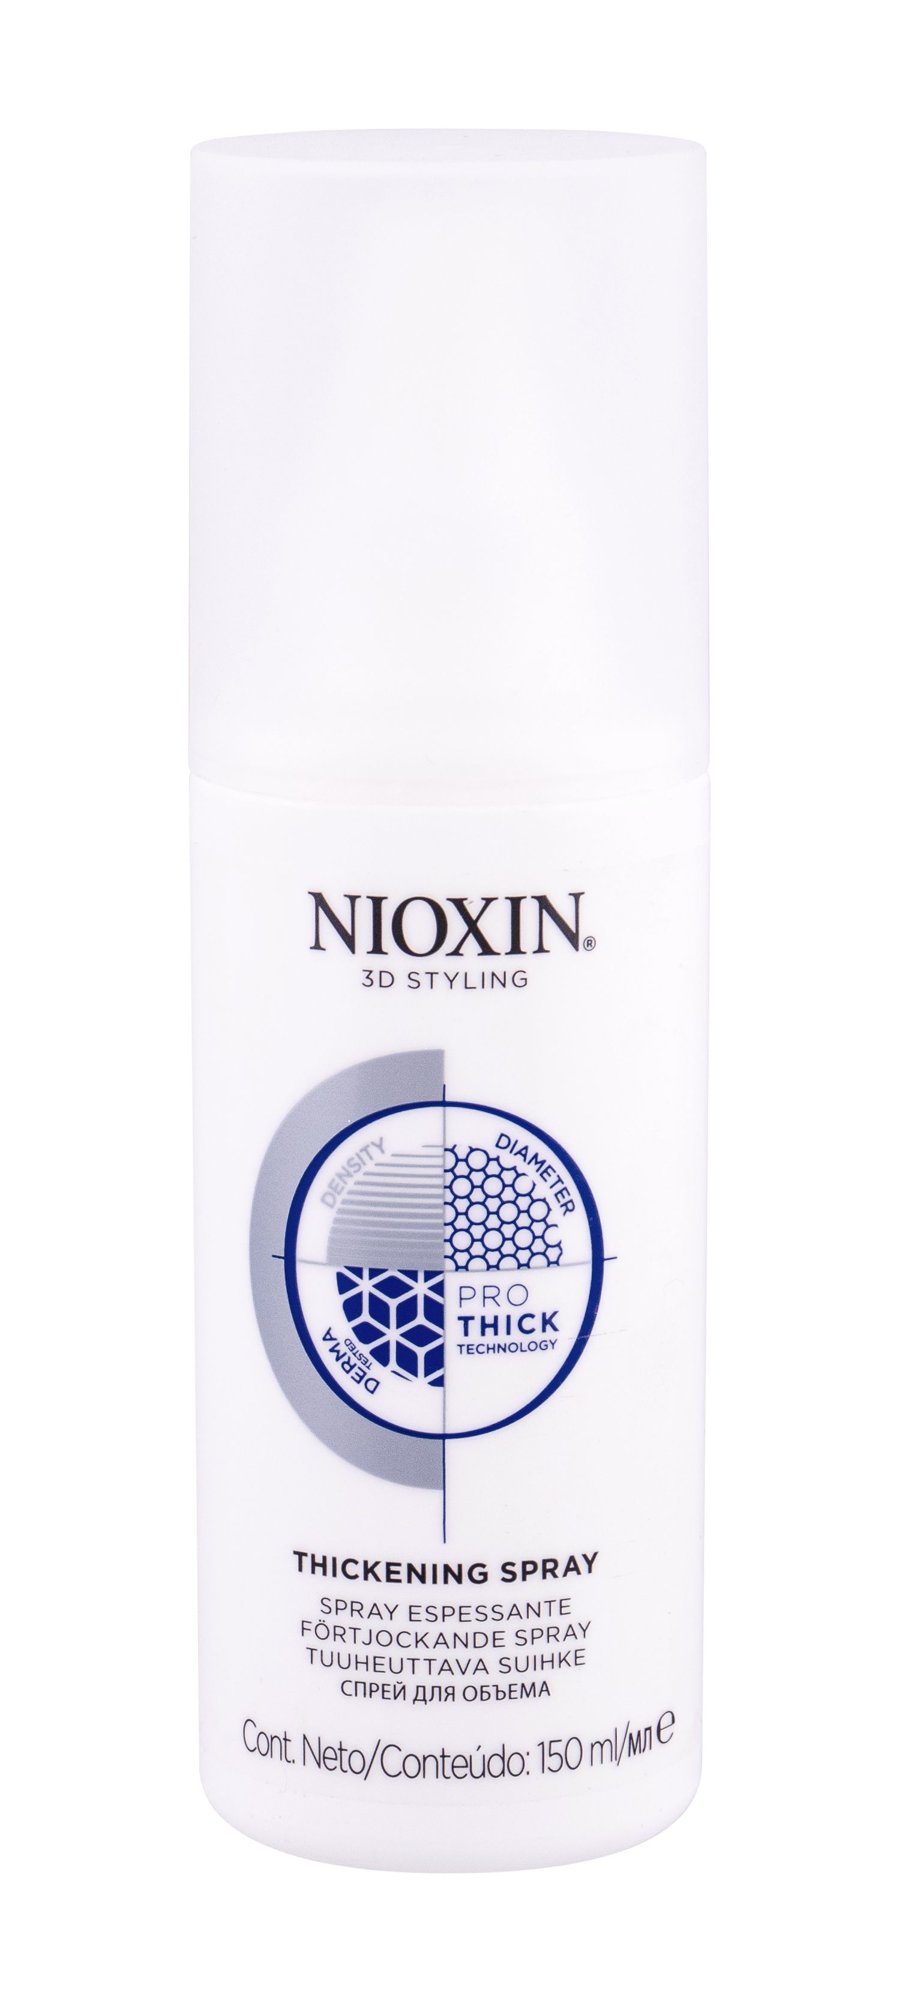 Nioxin 3D Styling Pro Thick Thickening Spray